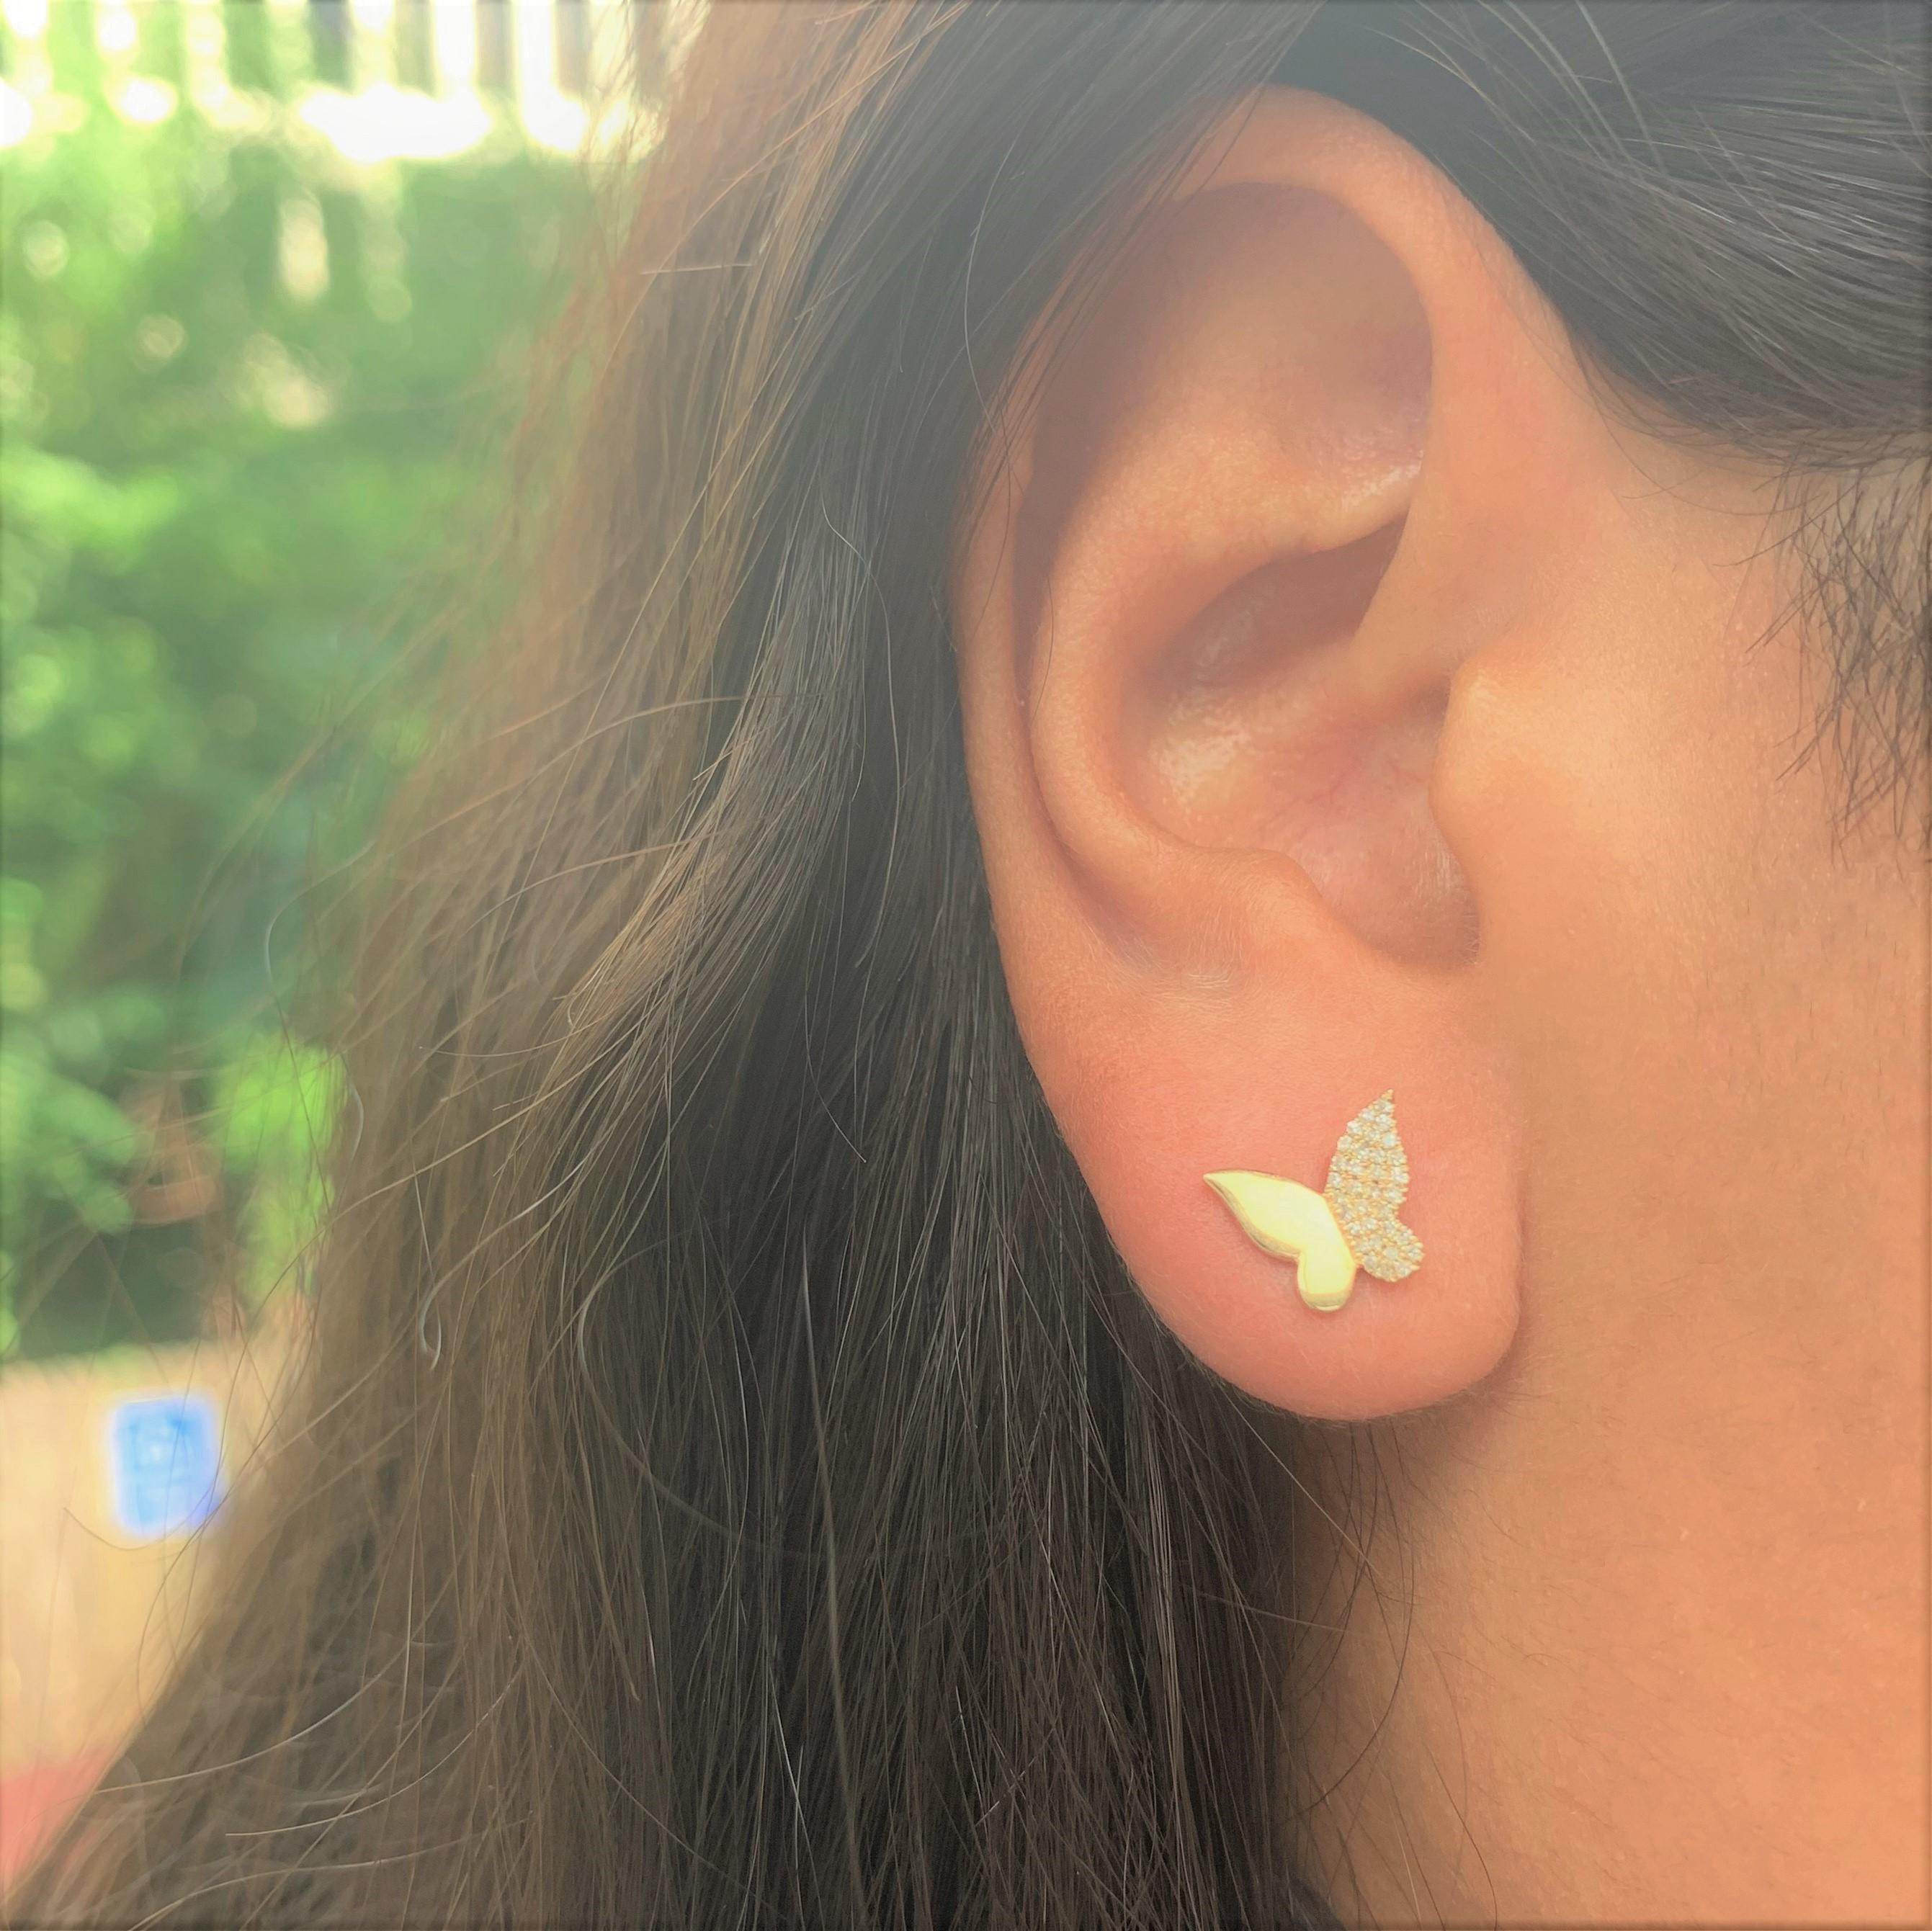 Ready to soar through the clear sky, a butterfly is both elegant and graceful. These sweet earrings feature fluttering wings filled with 0.17 ct. of round diamond accents, which connect to a smooth 14k yellow gold body. Take flight with these